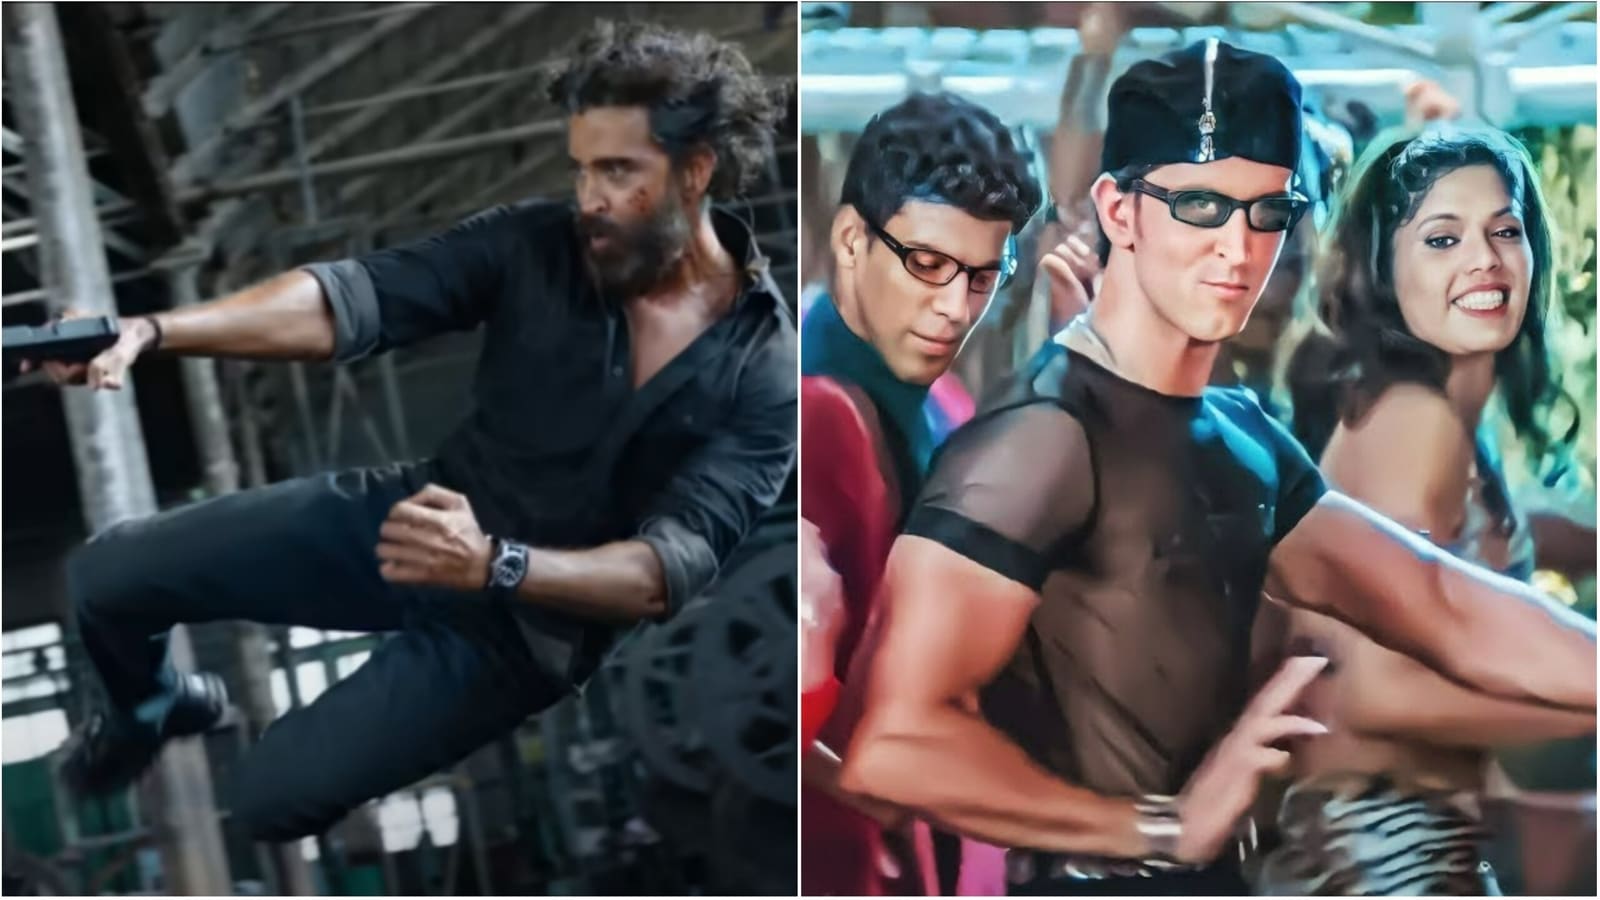 Hrithik Roshan says doctors told him before his debut he can’t do action films, dance: ’21-year-old me would be proud’